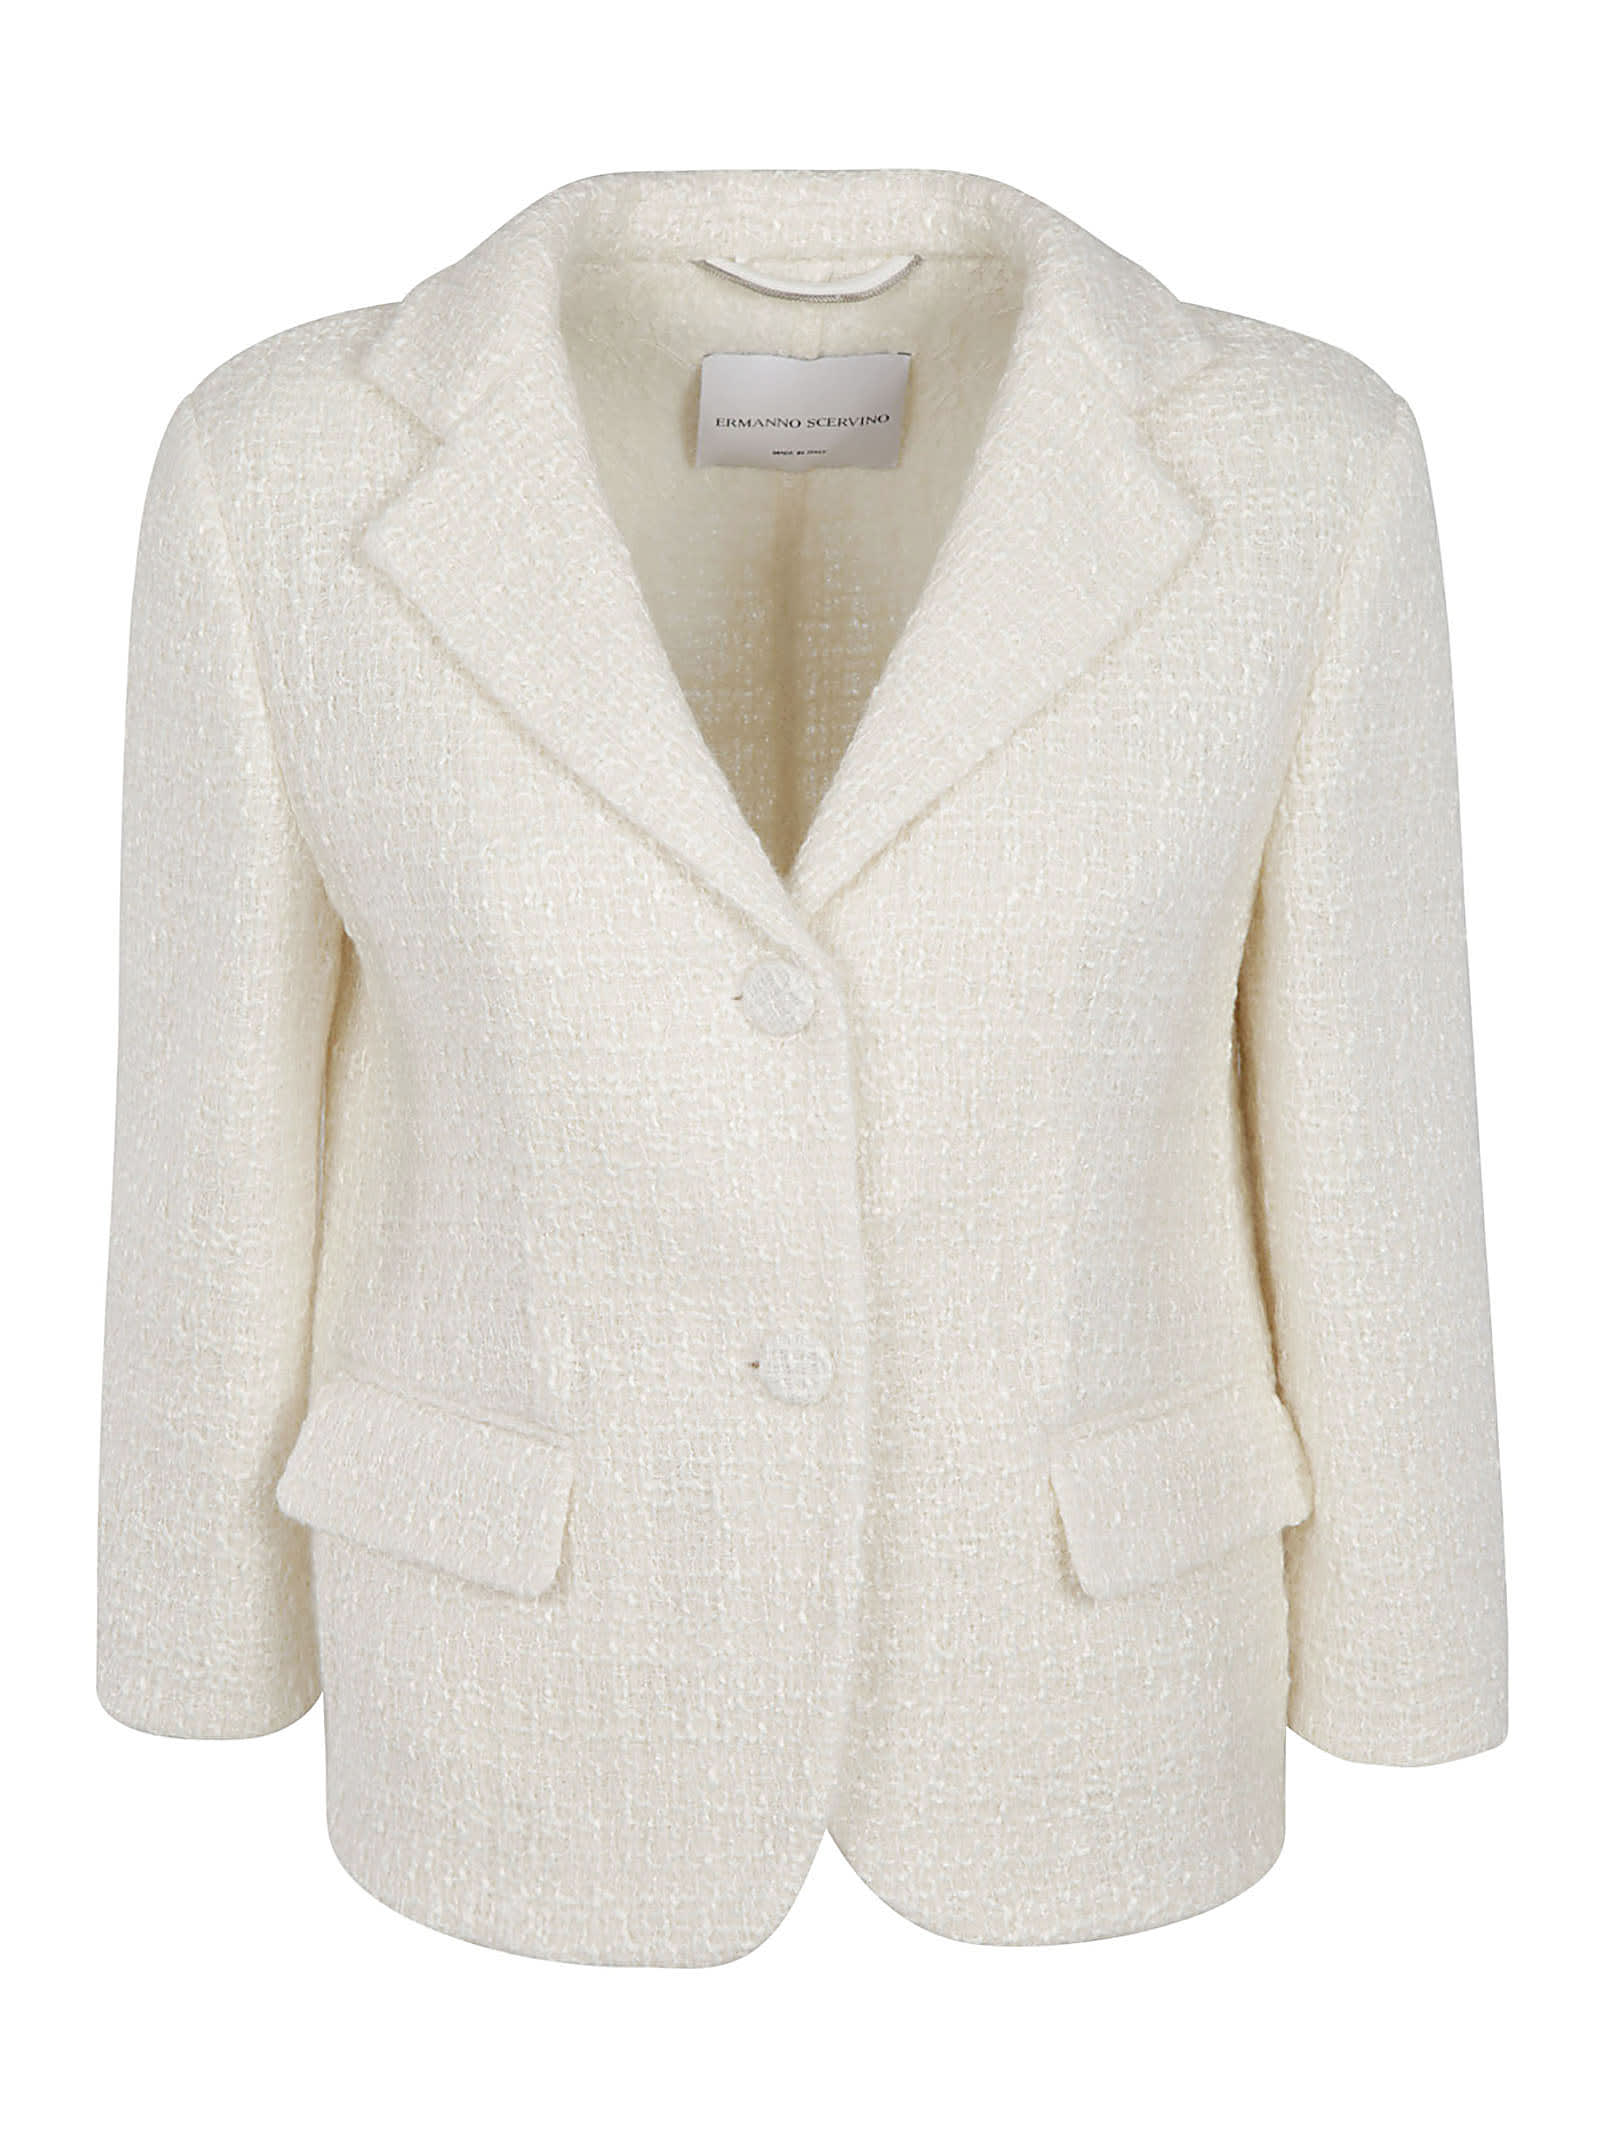 Ermanno Scervino Two Buttons Woven Jacket